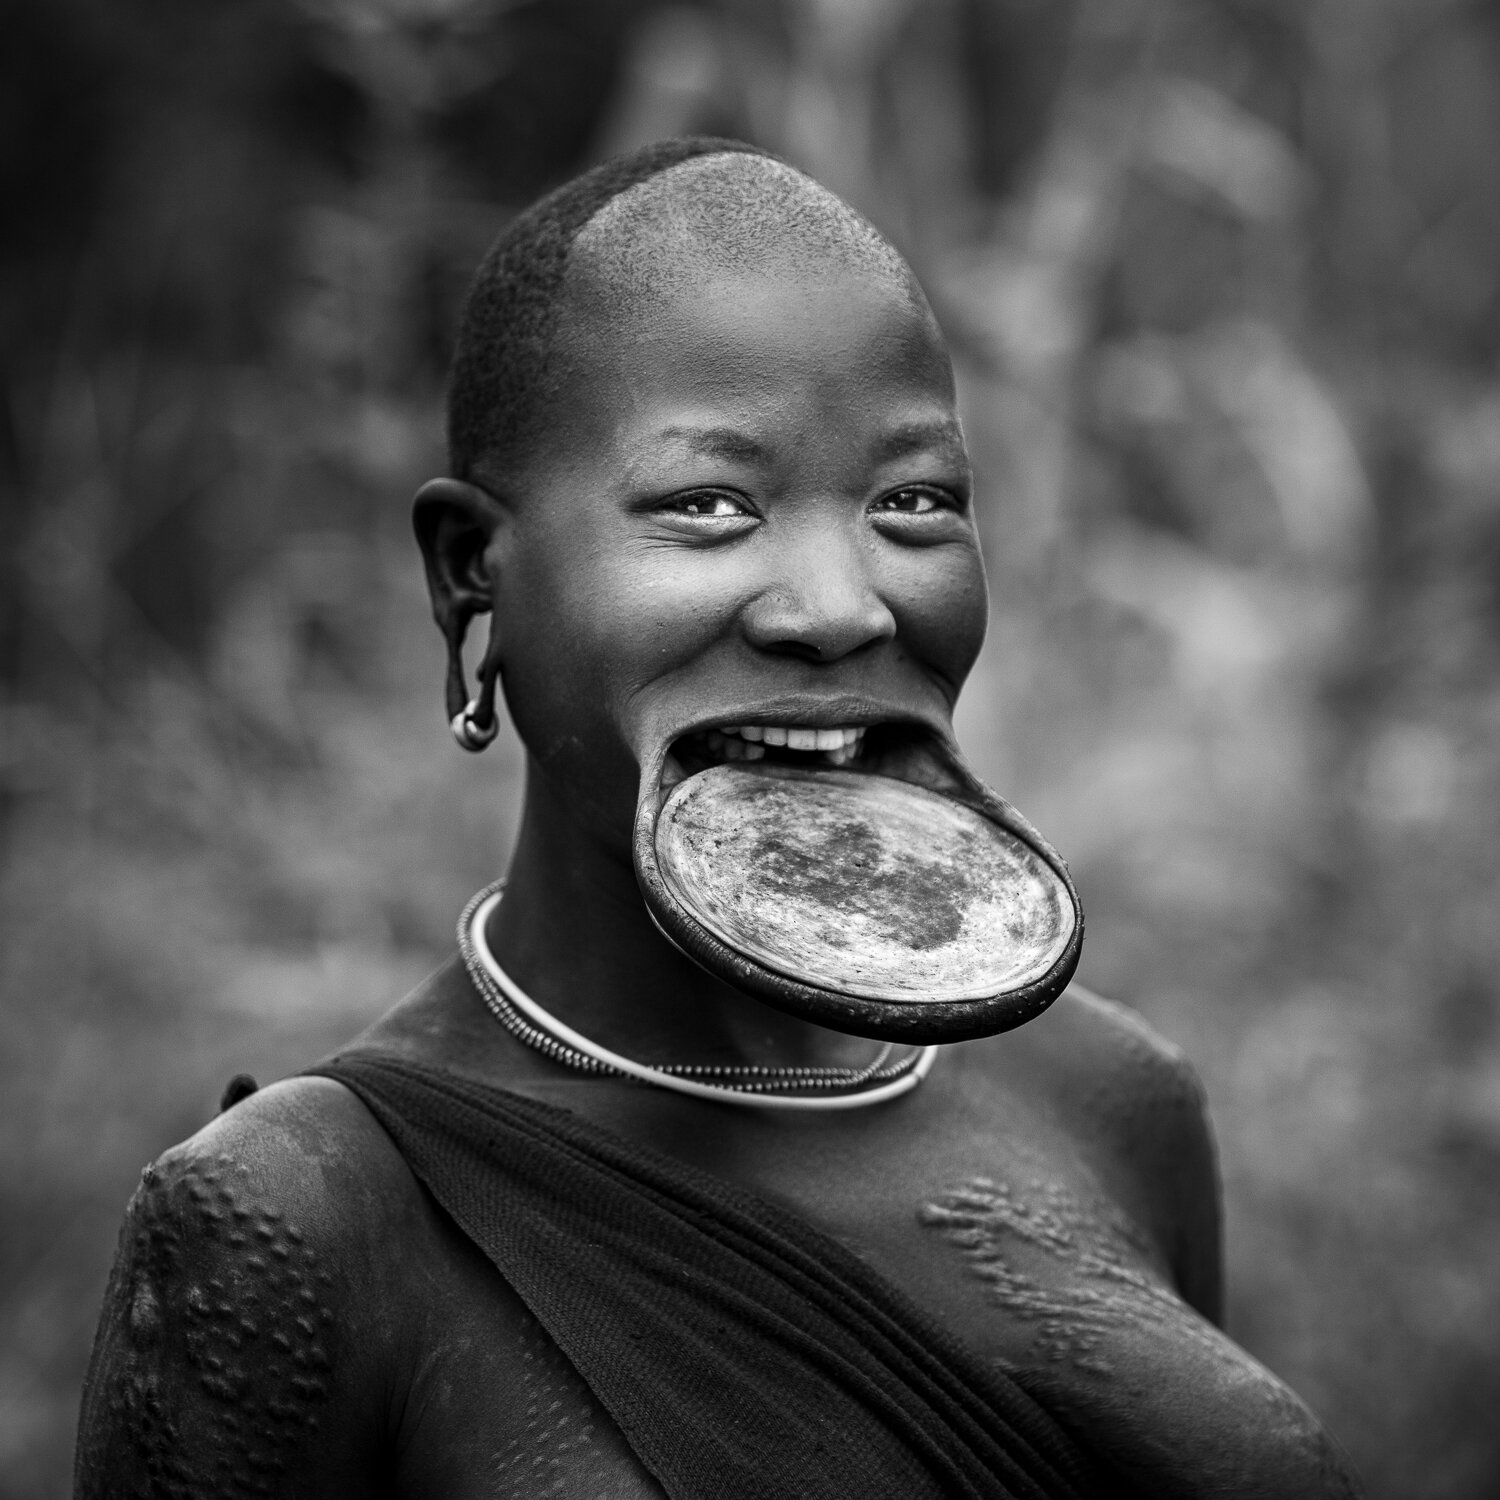  The women of the Suri and Mursi tribes have lip plates.&nbsp;They can remove them when eating or when they want to.&nbsp;The larger the lip plate the more cattle a man must give to her family to marry her. In more recent years some of the younger gi